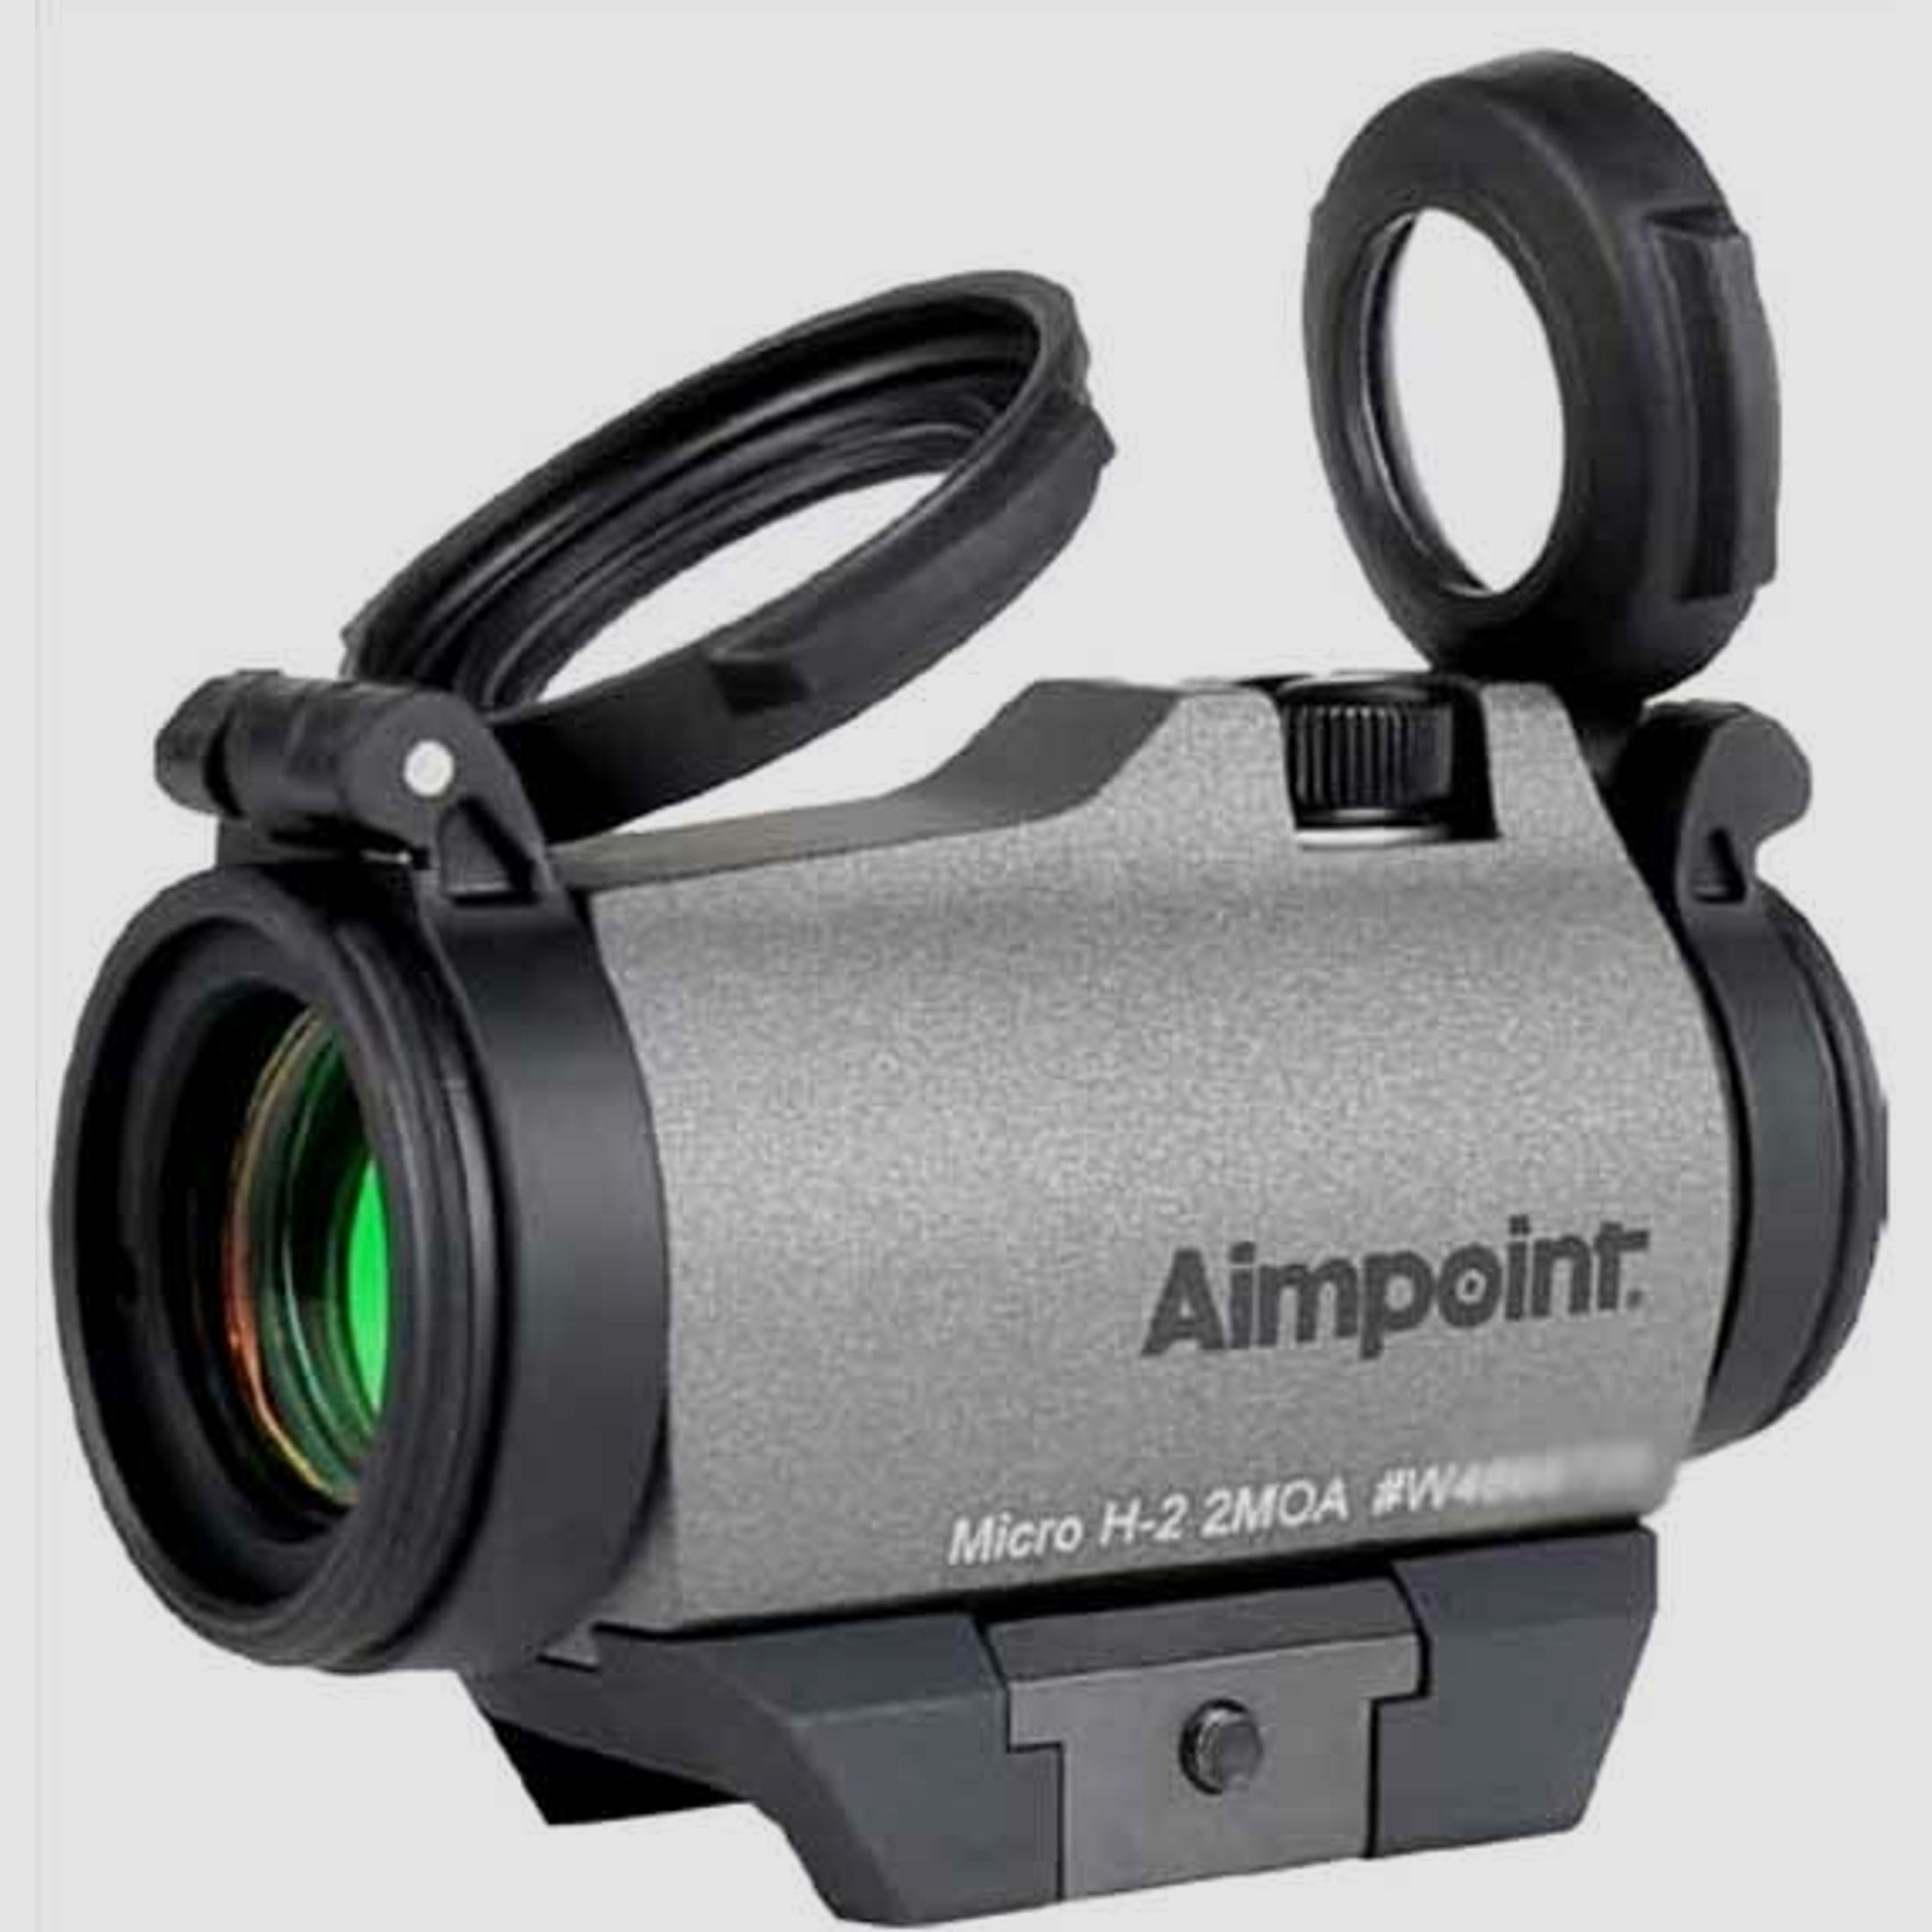 AIMPOINT	 Aimpoint Limited Edition Micro H-2 2 MOA Tungsten Cerakote®